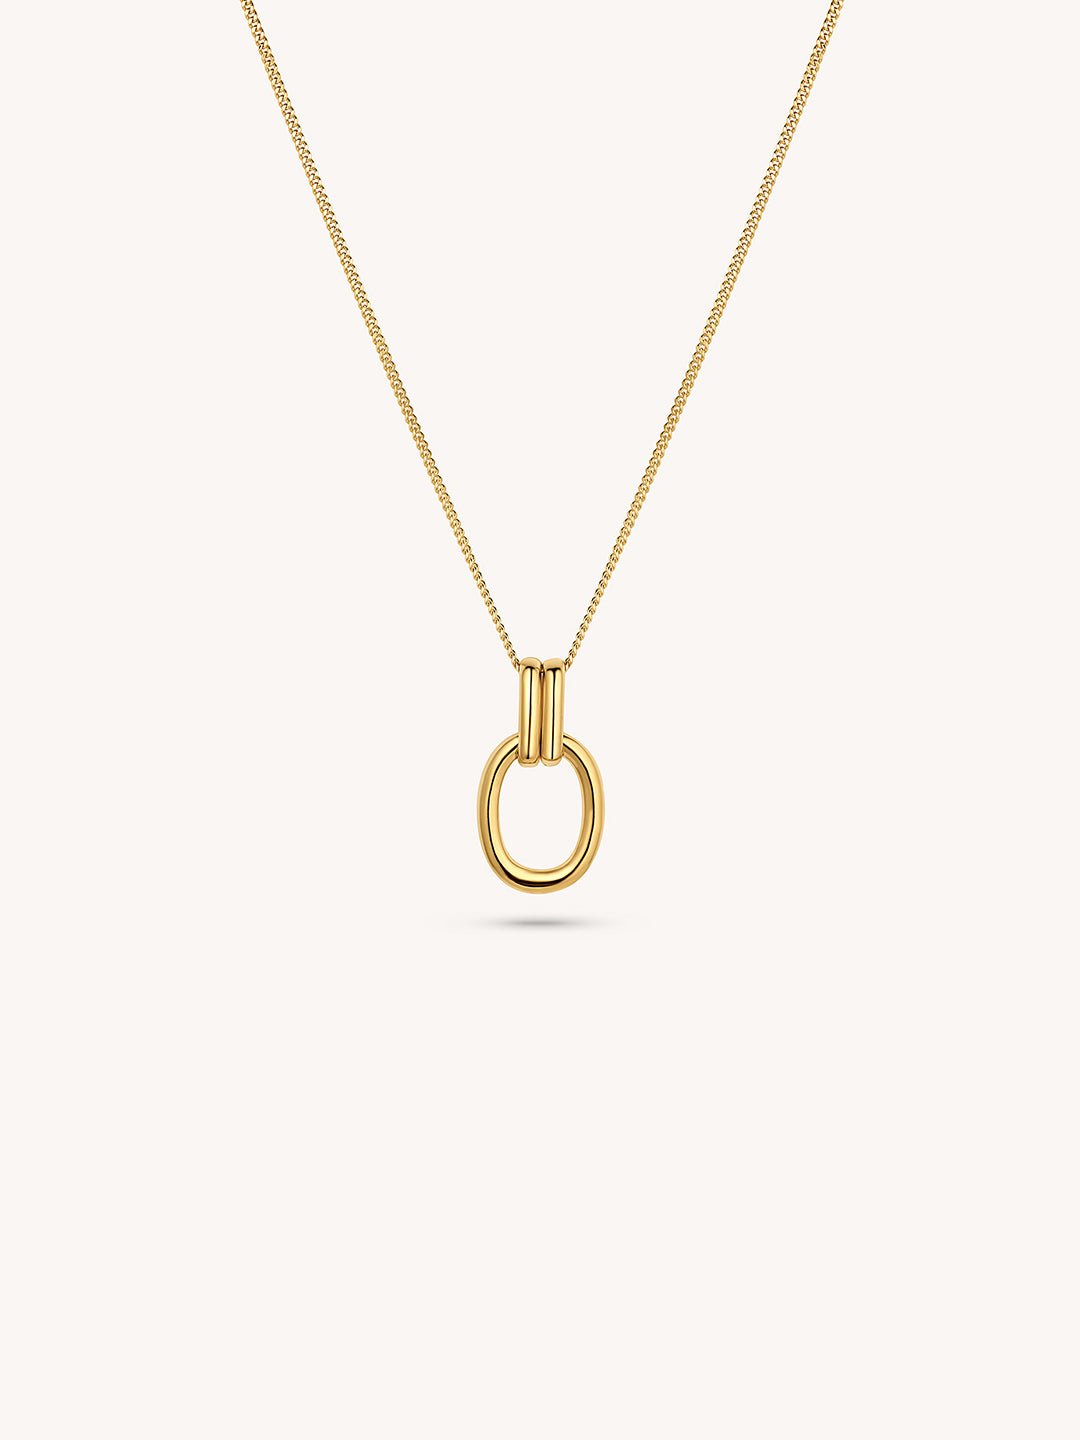 24k Gold Plated Silver Lock Necklace - Revermejewelry